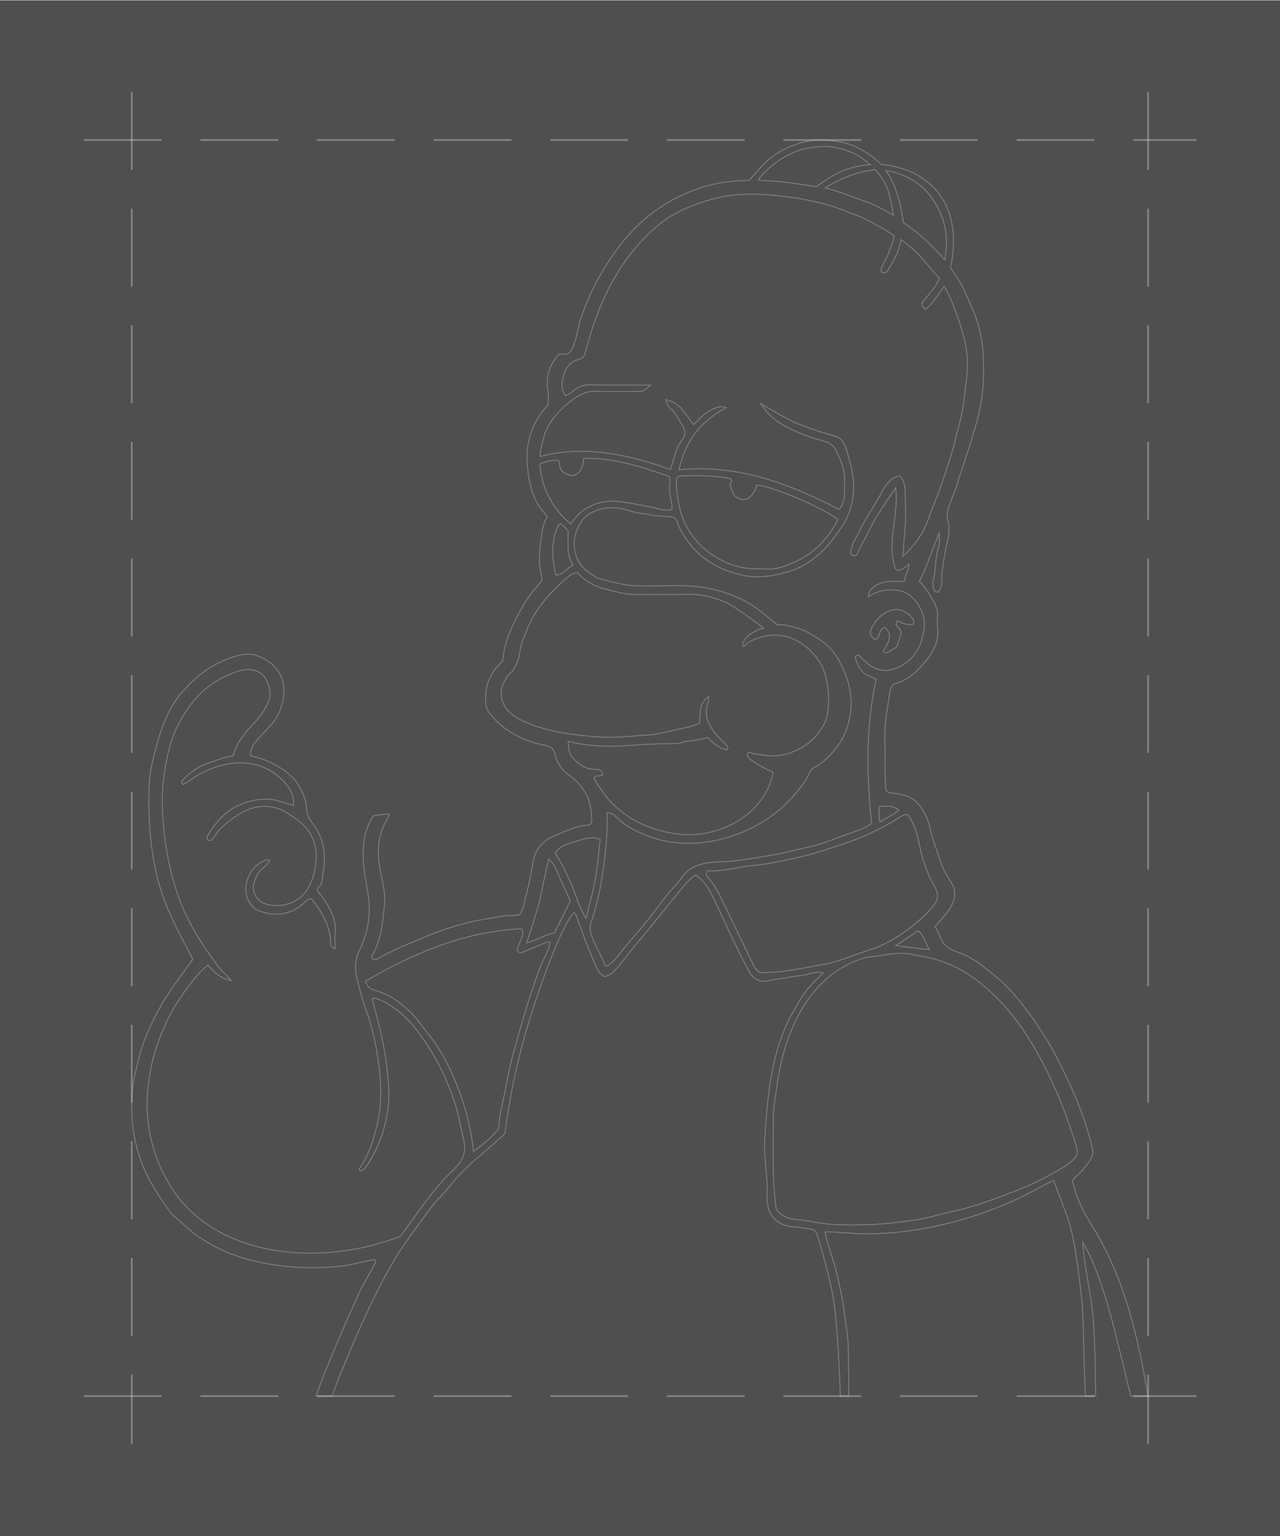 A dark grey box with Homer Simpson in it